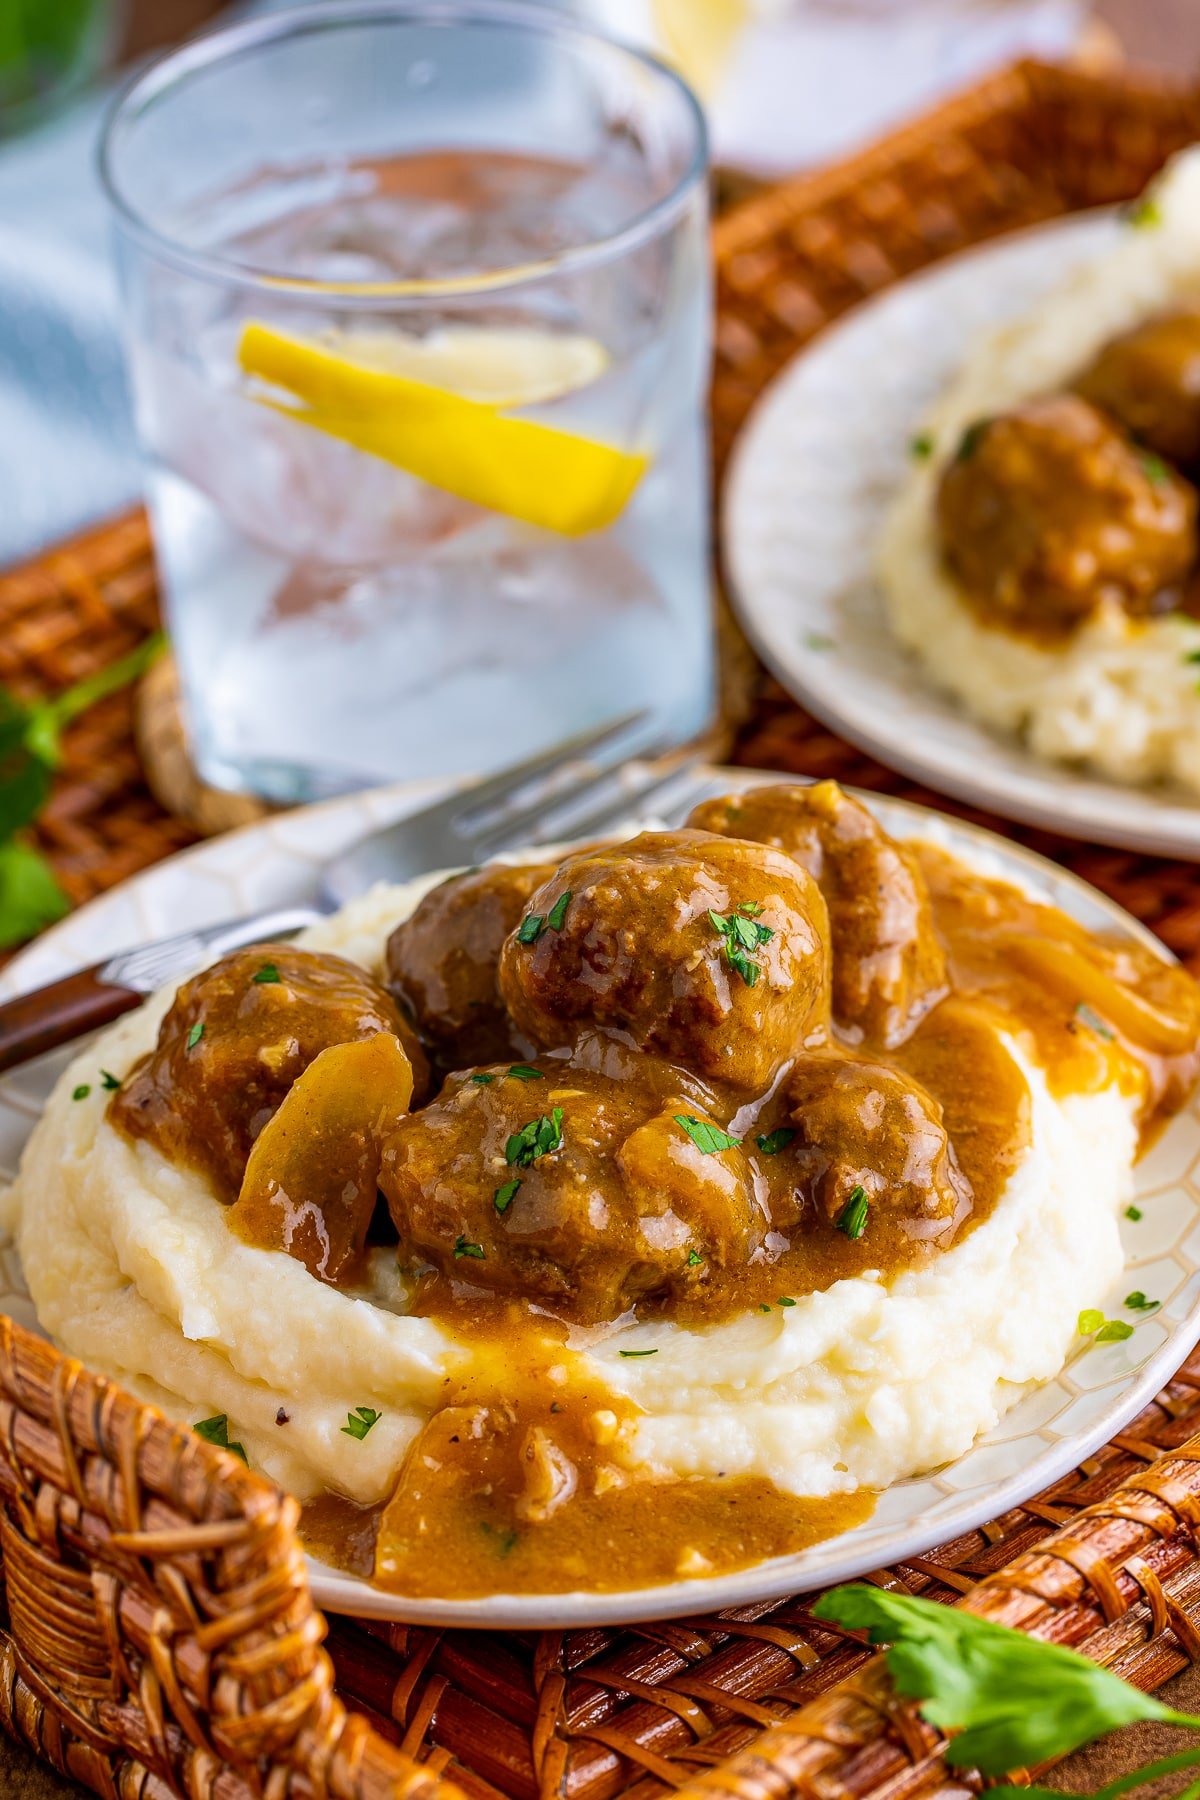 A plate of Meatballs and gravy served over mashed potatoes on a wicker tray, glass of ice water with lemon in the background and light blue linen.